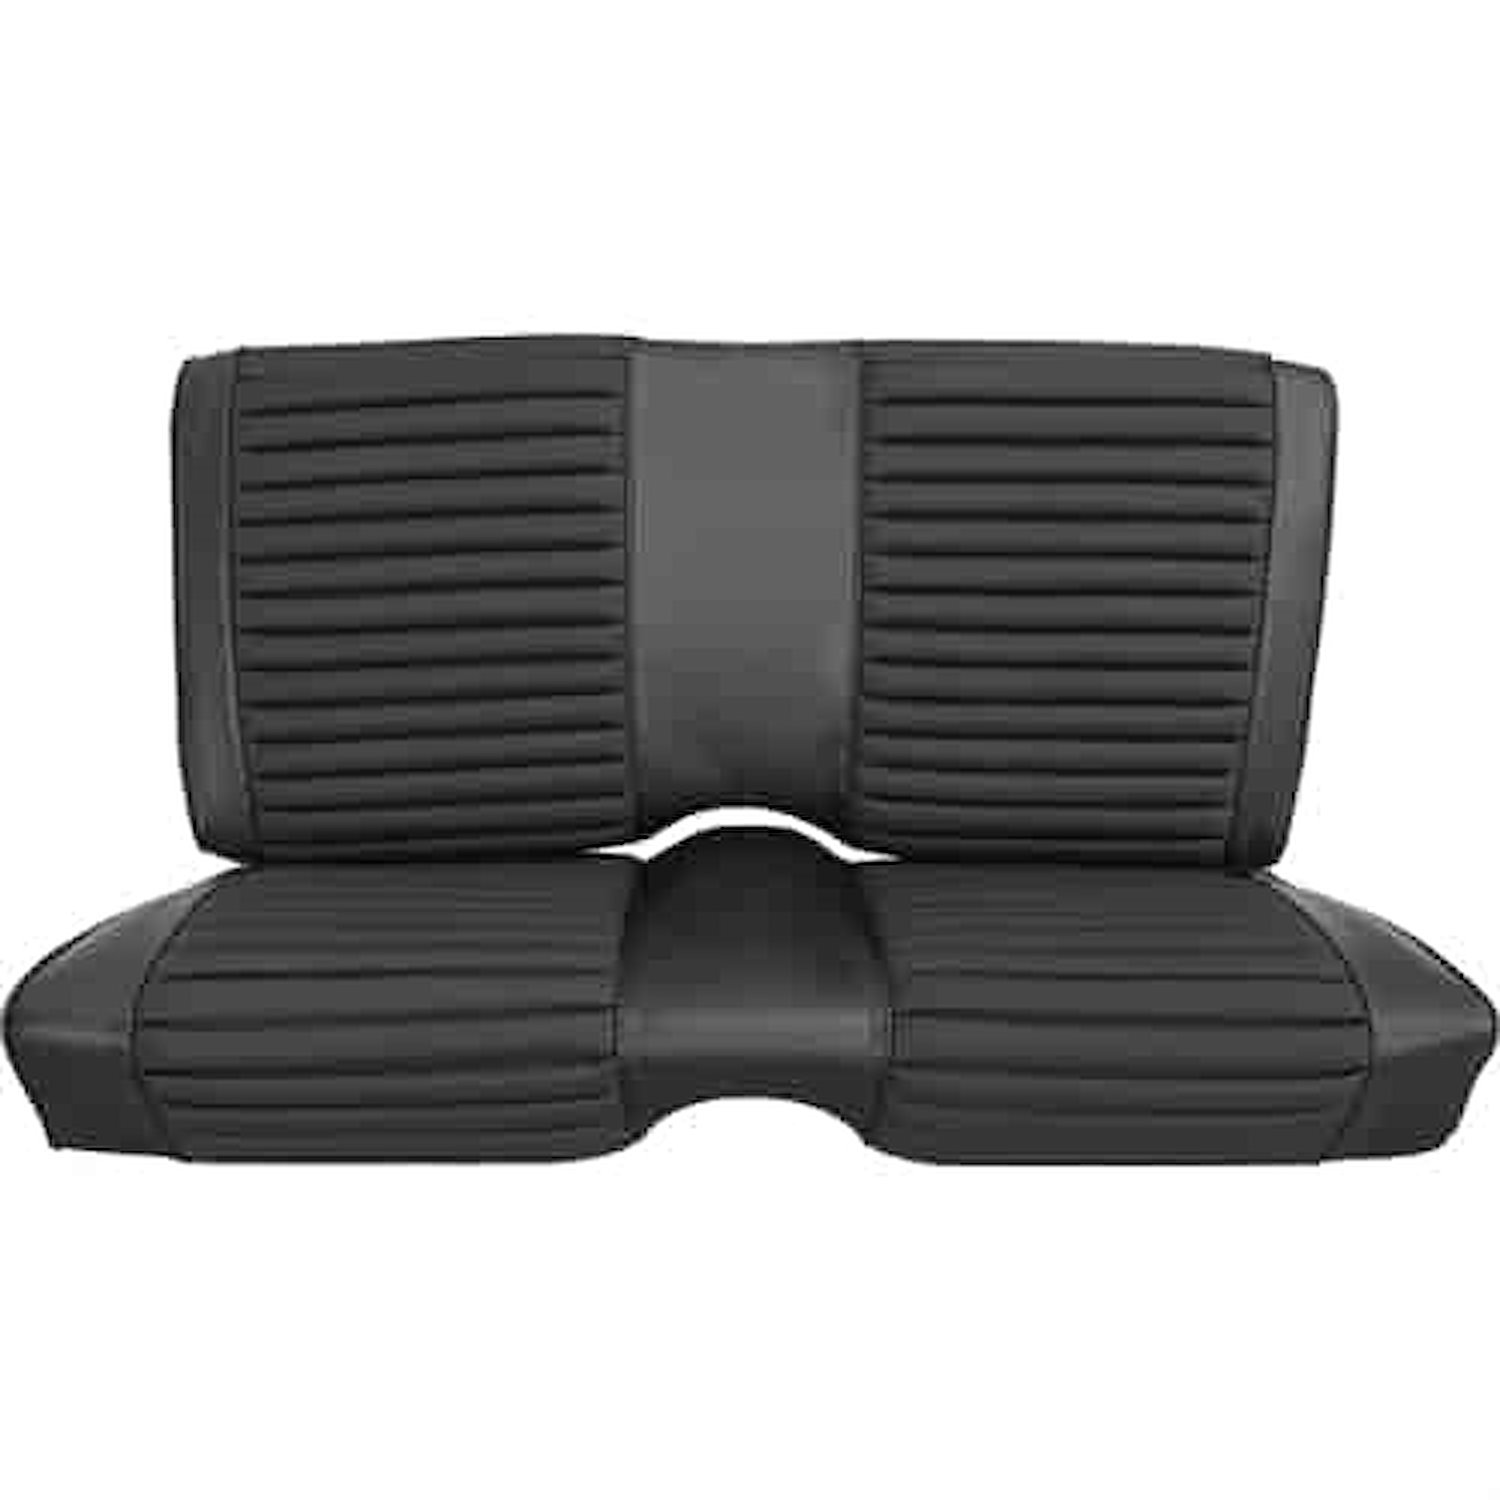 Rear Bench Seat Upholstery for 1970-1971 Ford Torino